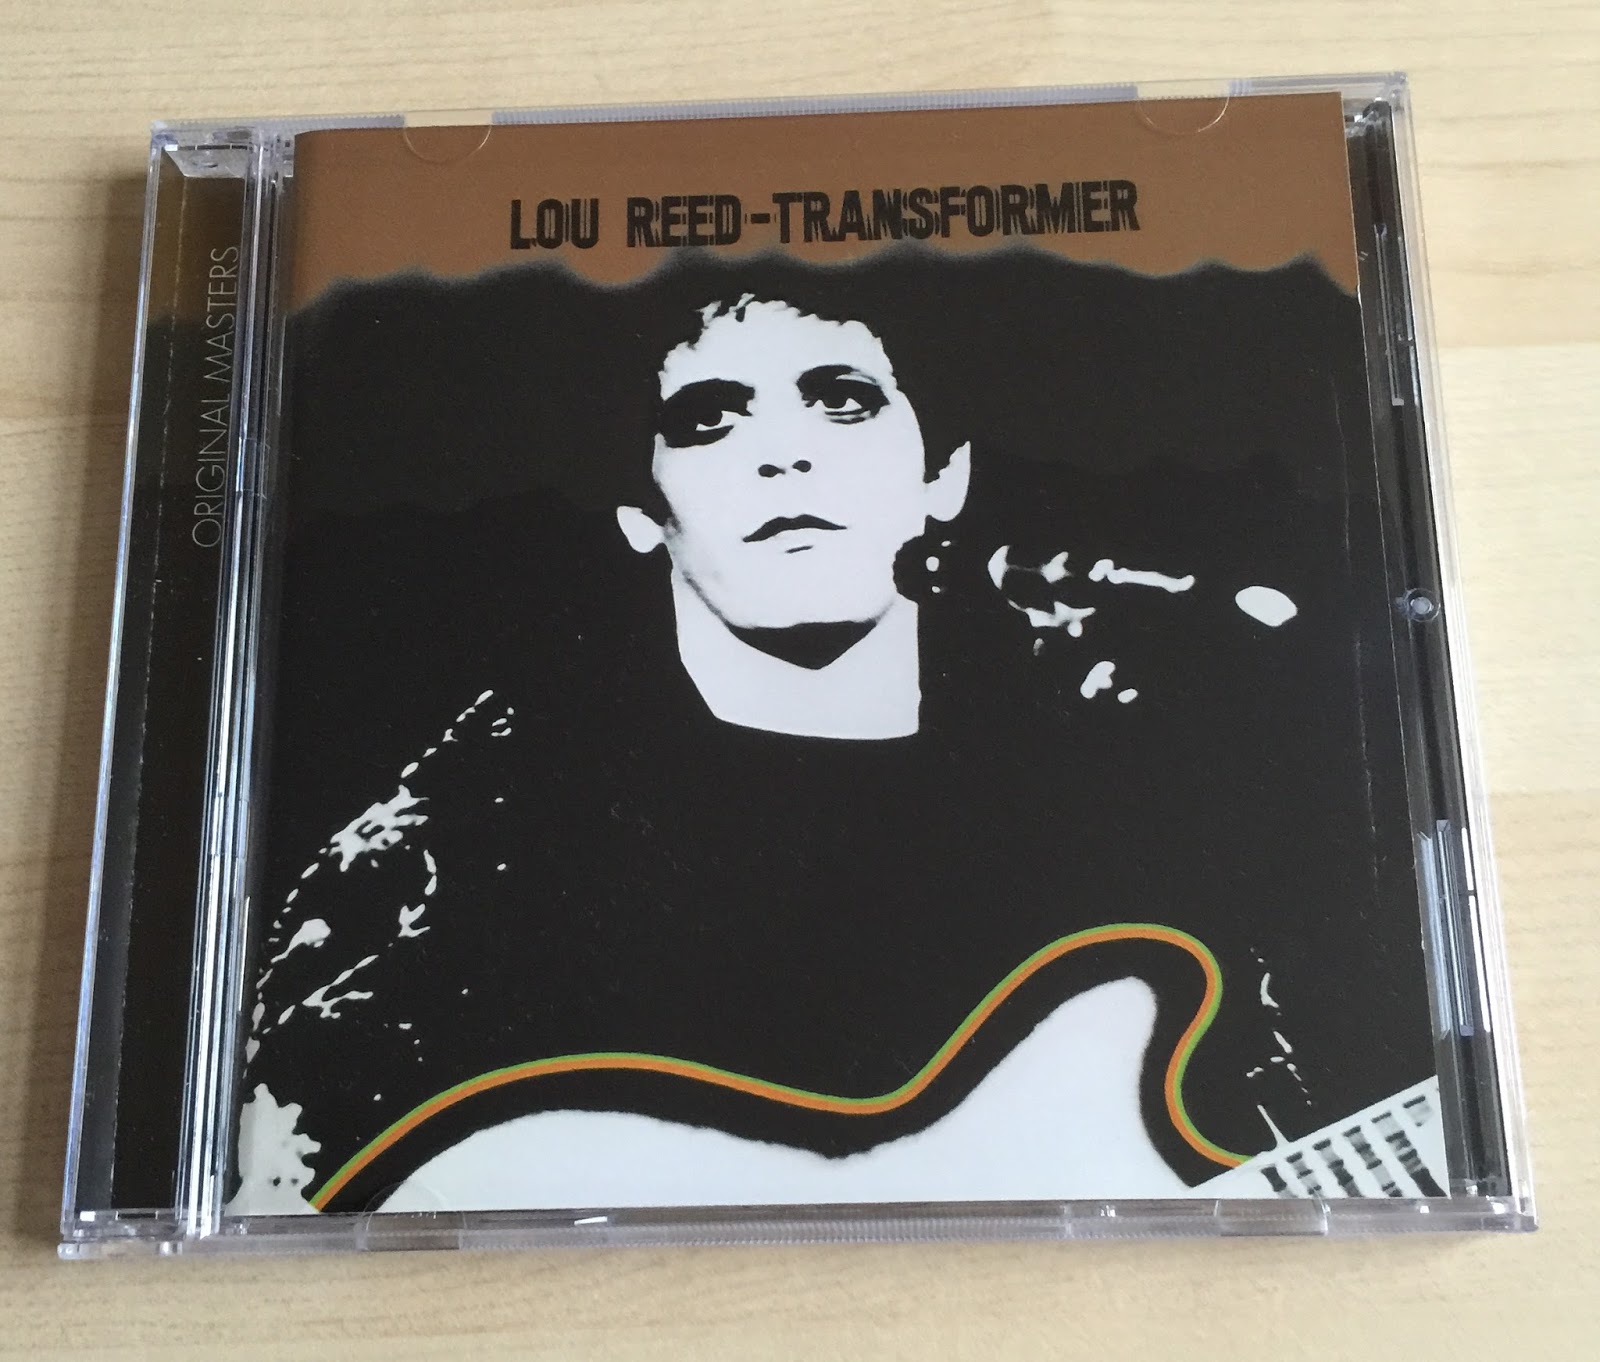 Sounds Good, Looks Good: "Transformer" by LOU REED (2002 BMG/RCA